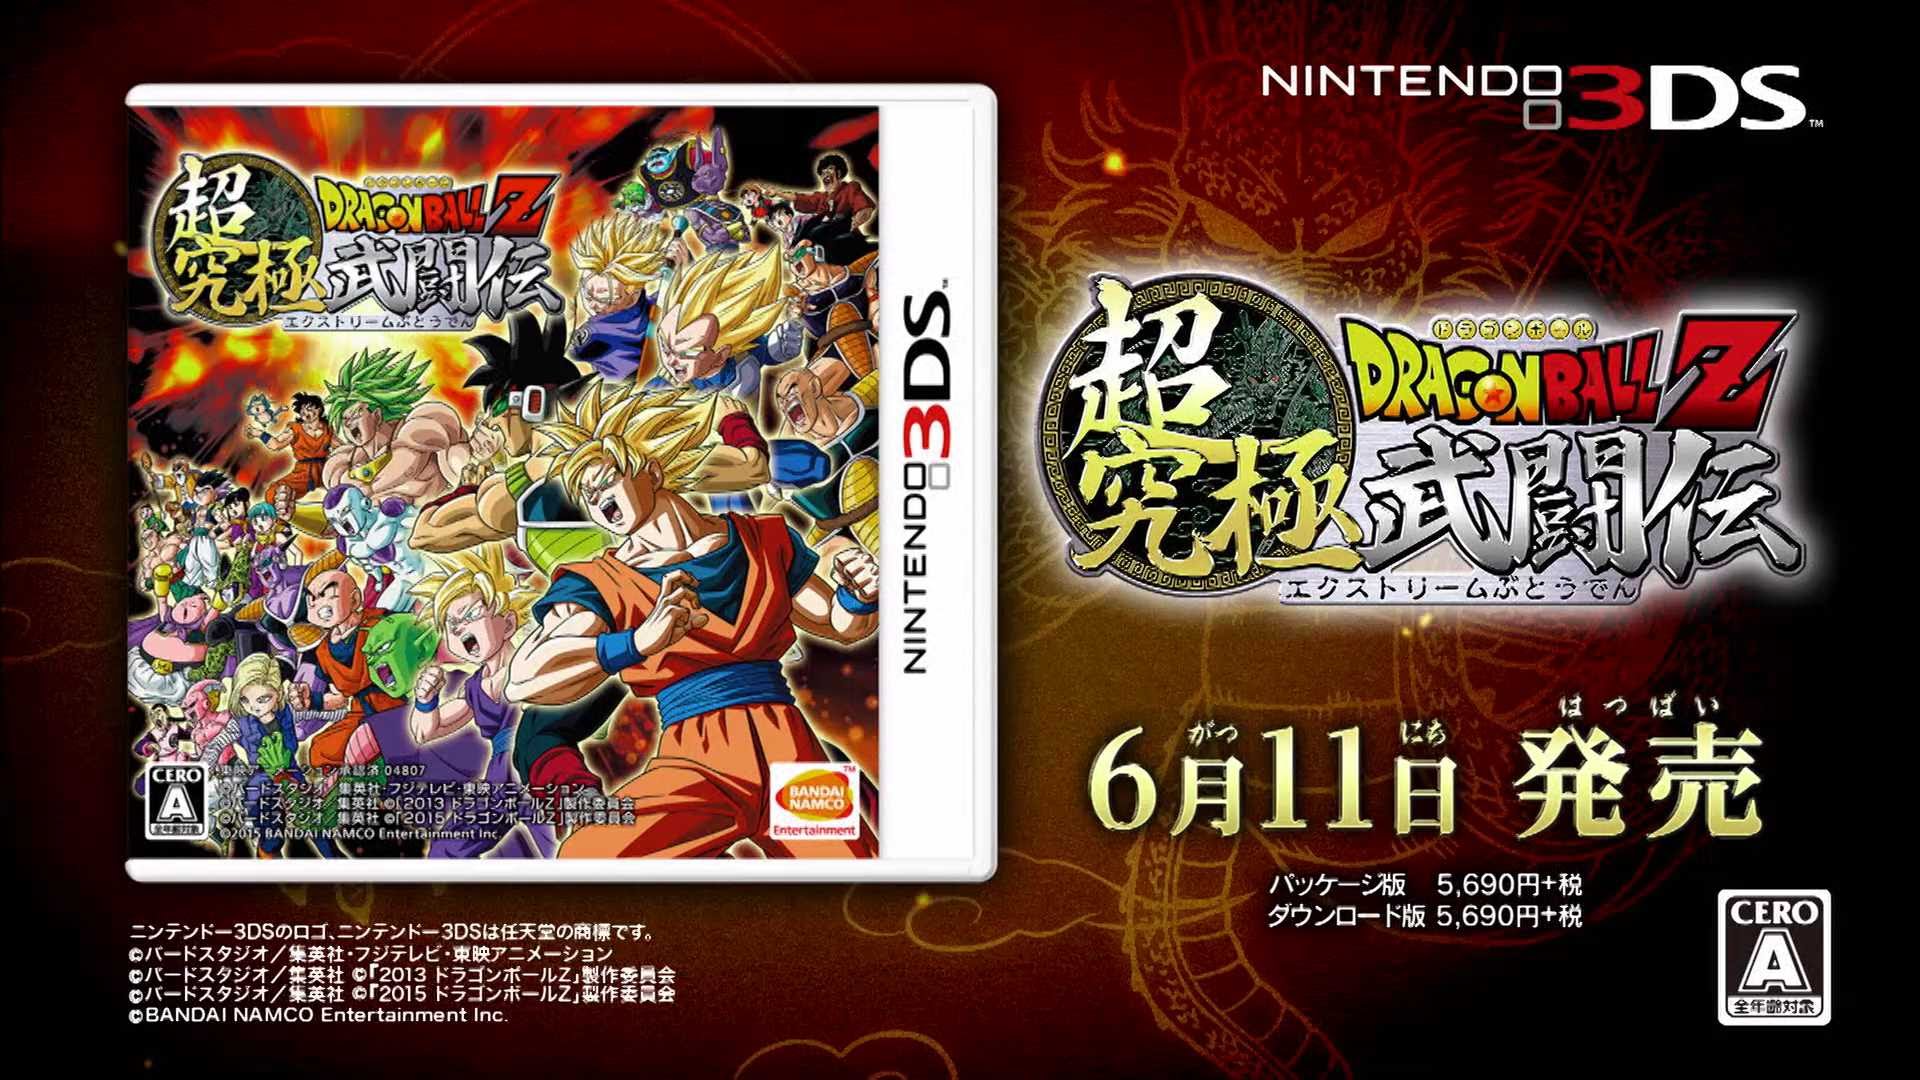 Dragon Ball Z: Super Extreme Butouden 3DS trailer